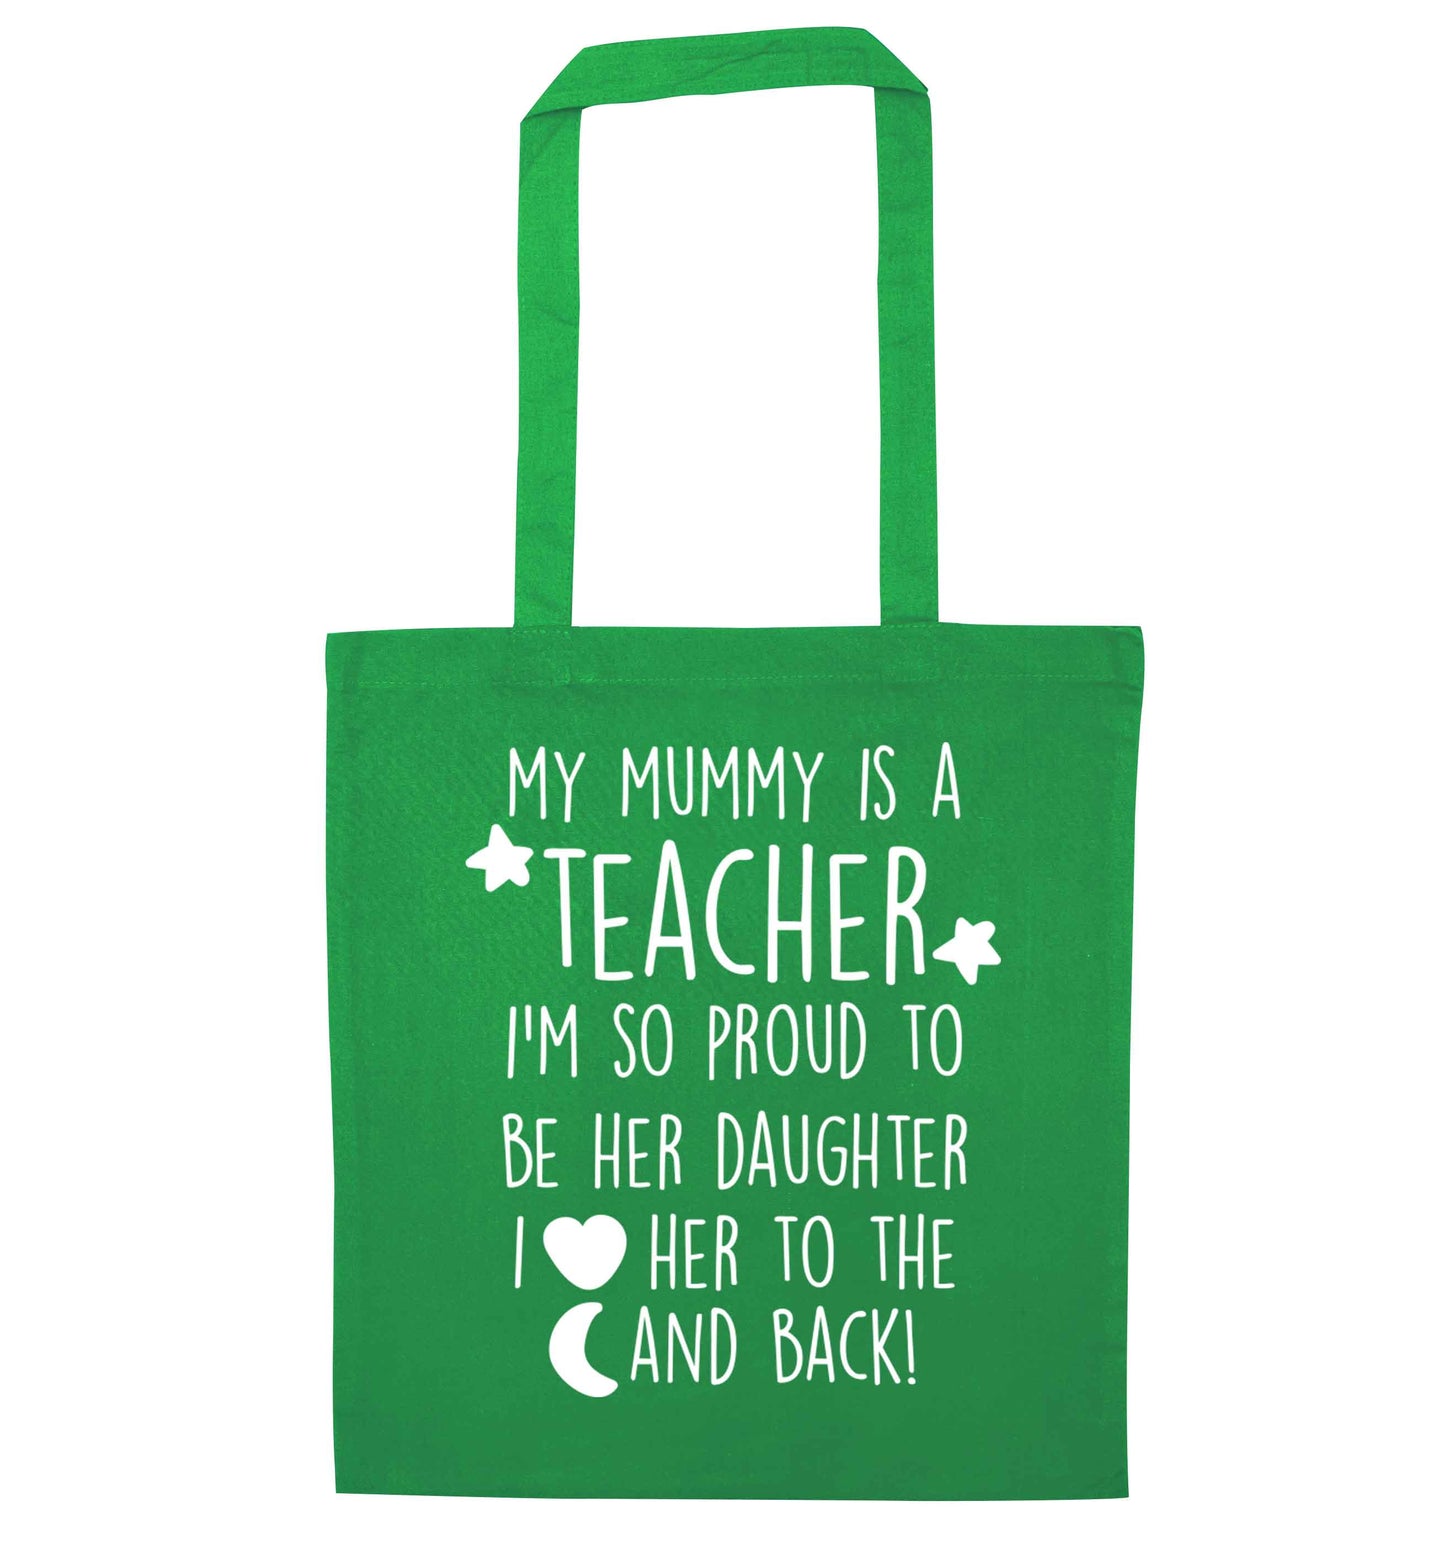 My mummy is a teacher I'm so proud to be her daughter I love her to the moon and back green tote bag